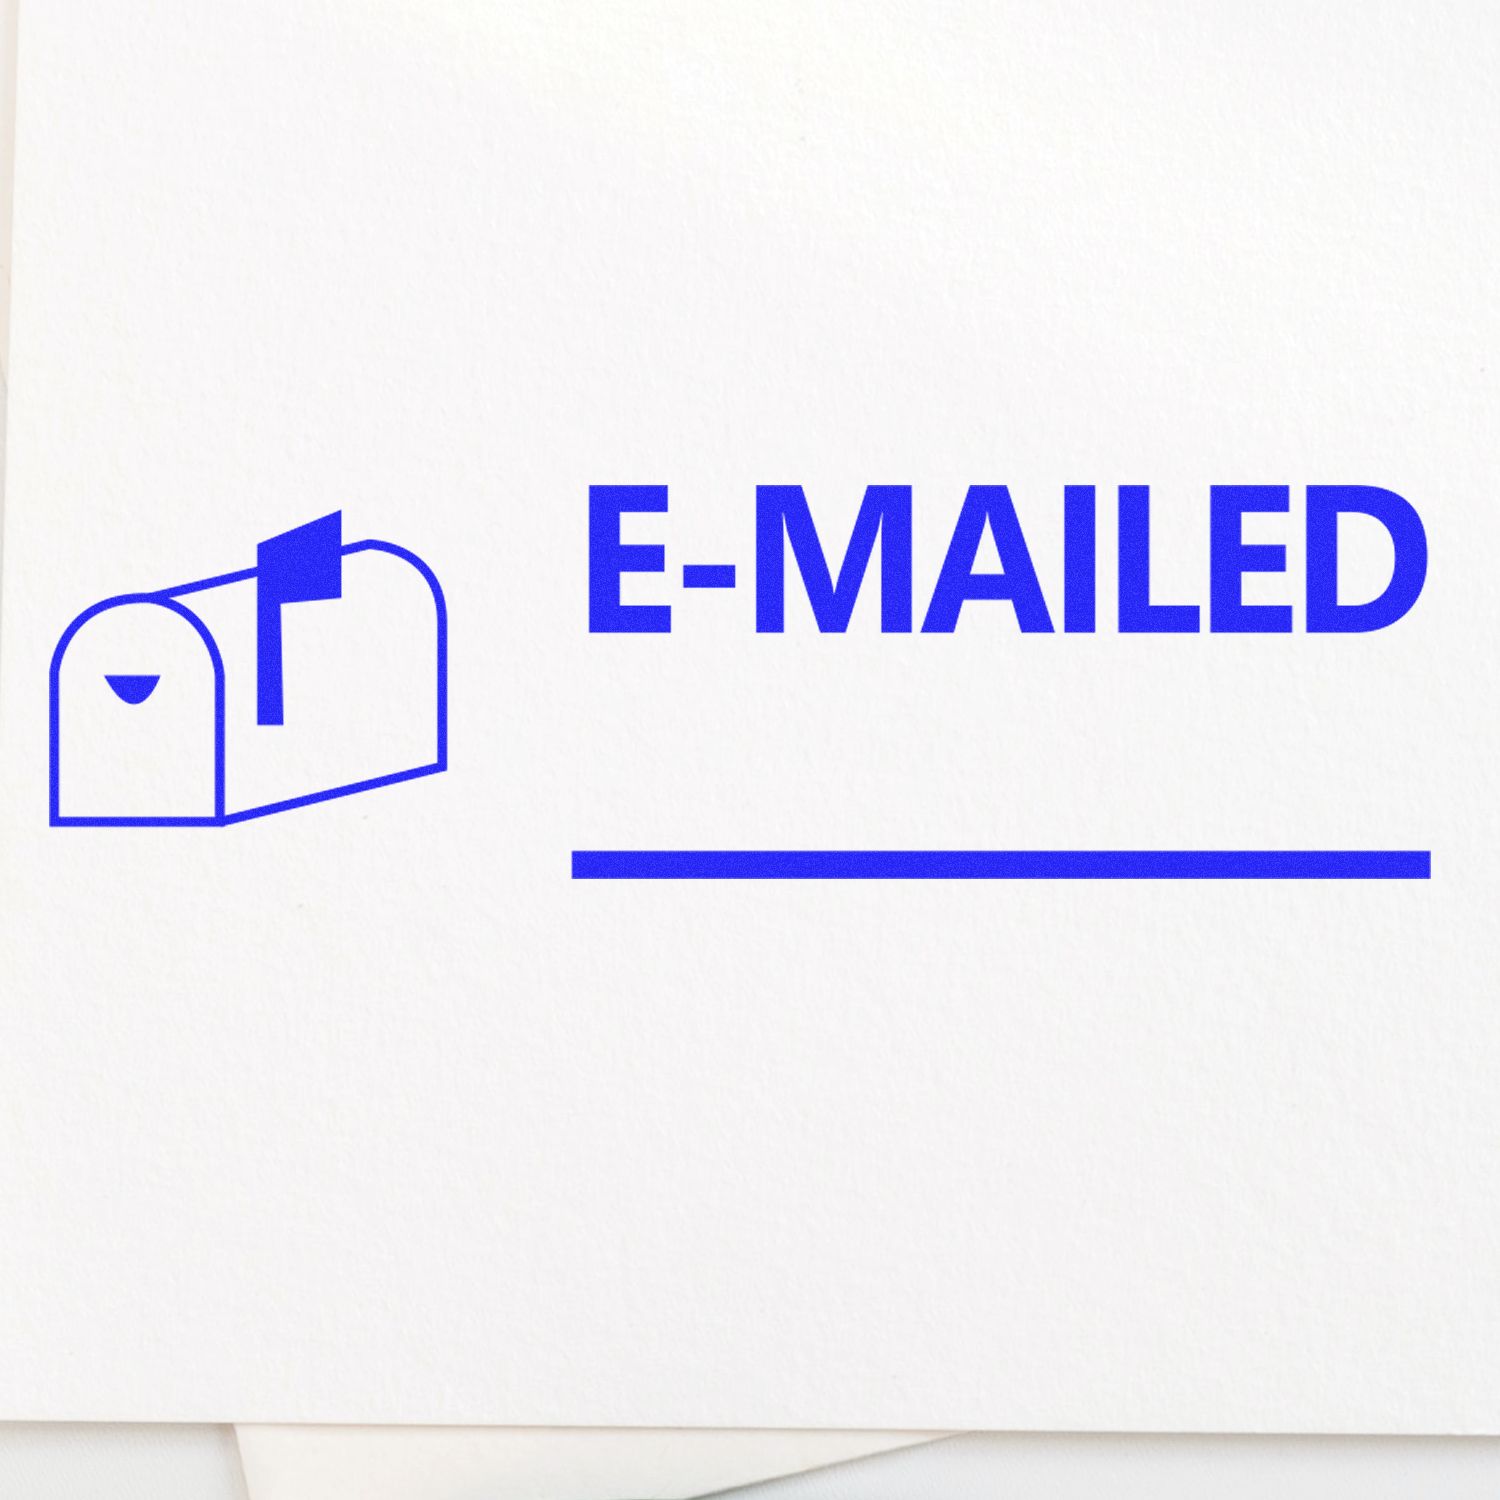 Large Pre-Inked Emailed with Mailbox Stamp In Use Photo